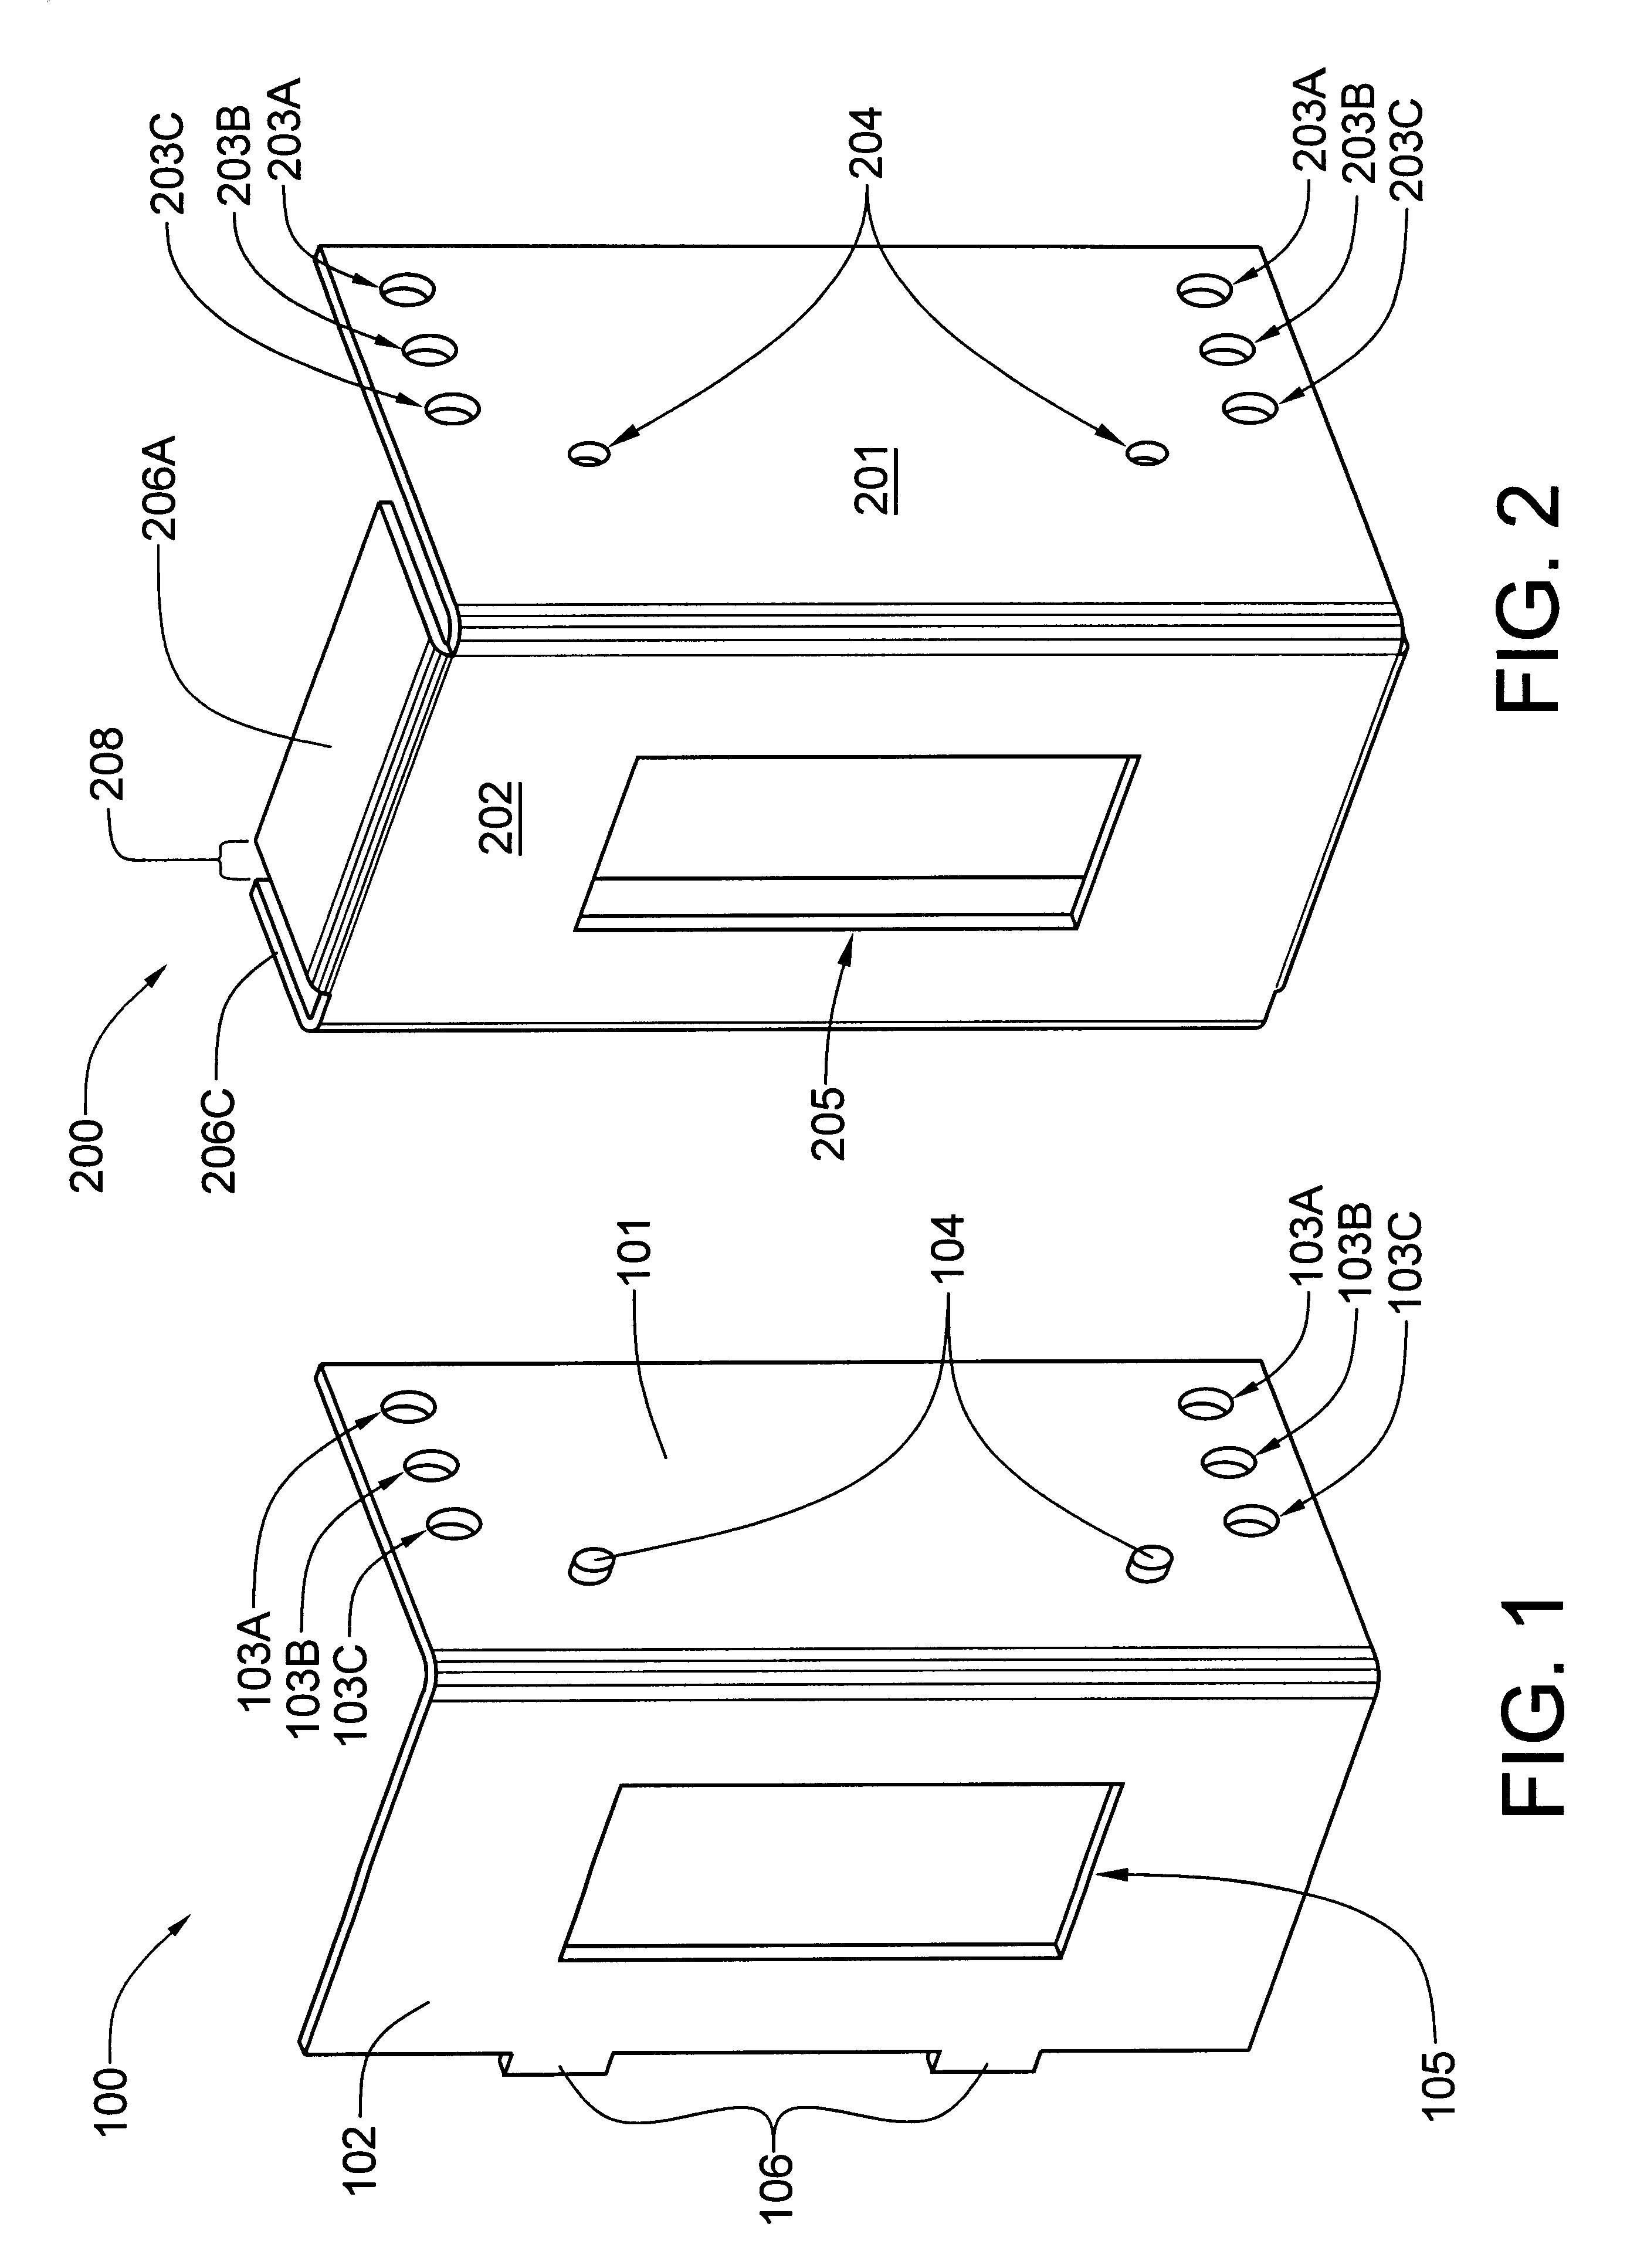 Bracket assembly for mounting a reed switch and associated magnet